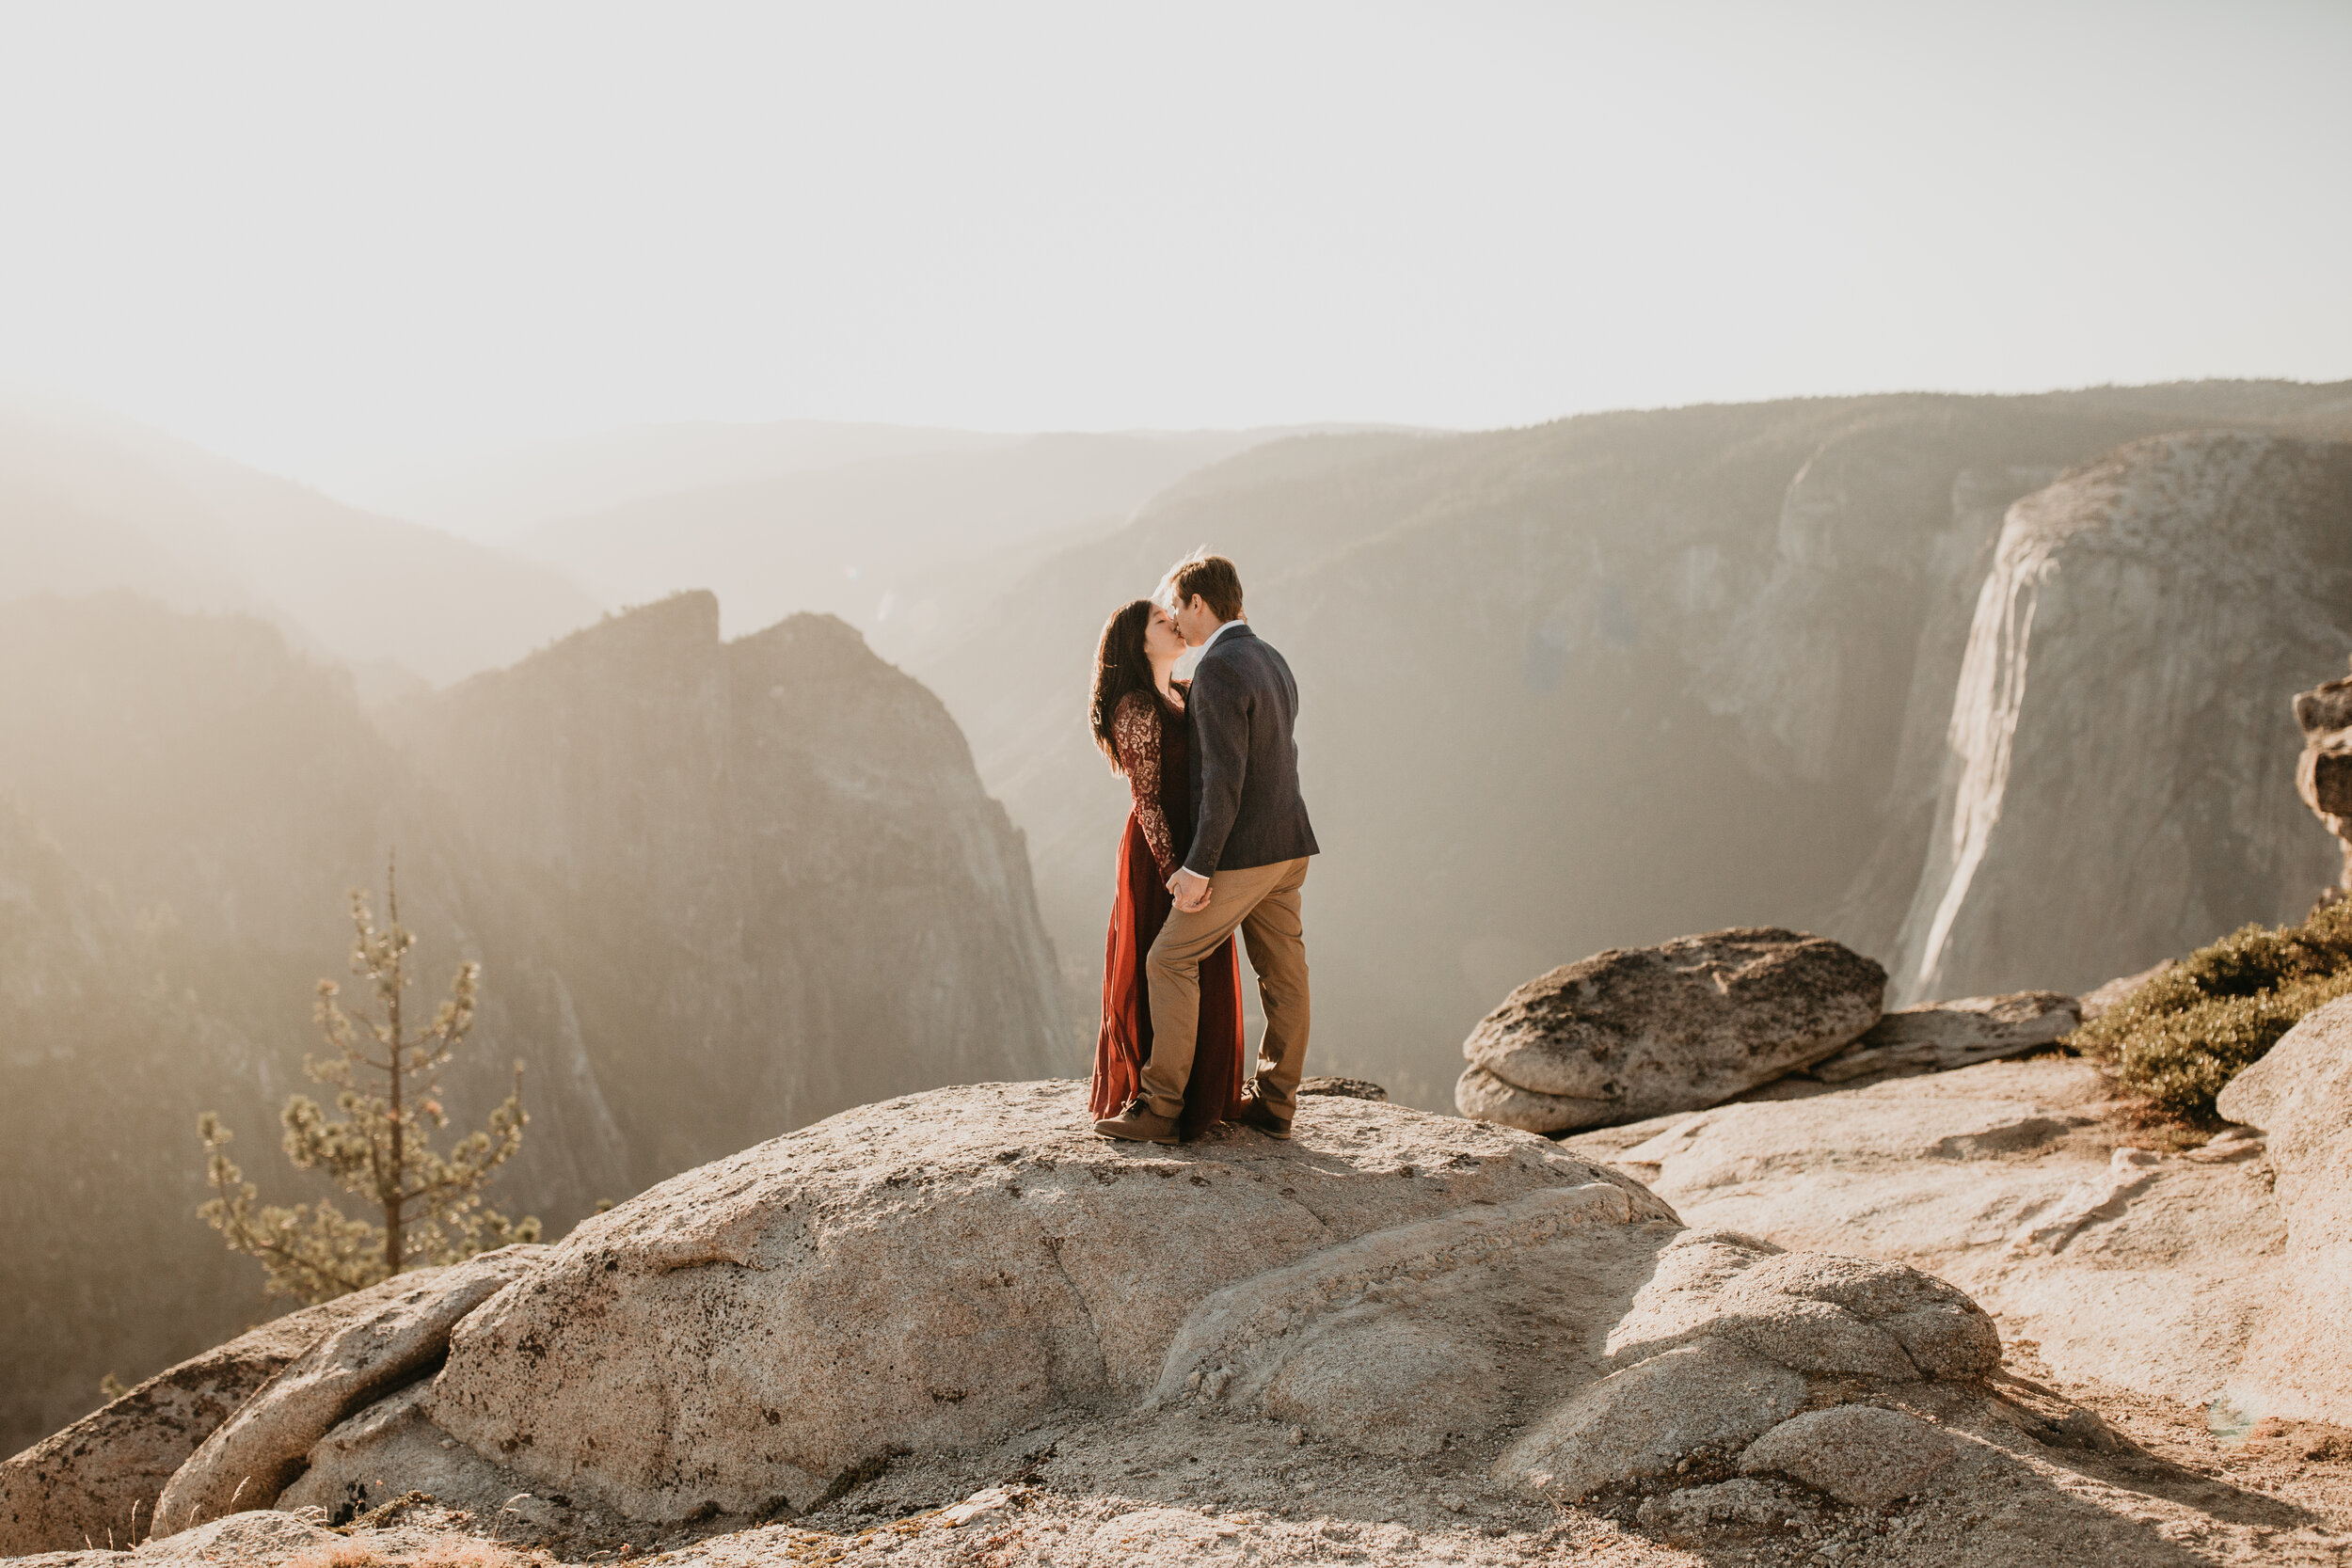 yosemite-national-park-couples-session-at-taft-point-and-yosemite-valley-yosemite-elopement-photographer-nicole-daacke-photography-130.jpg